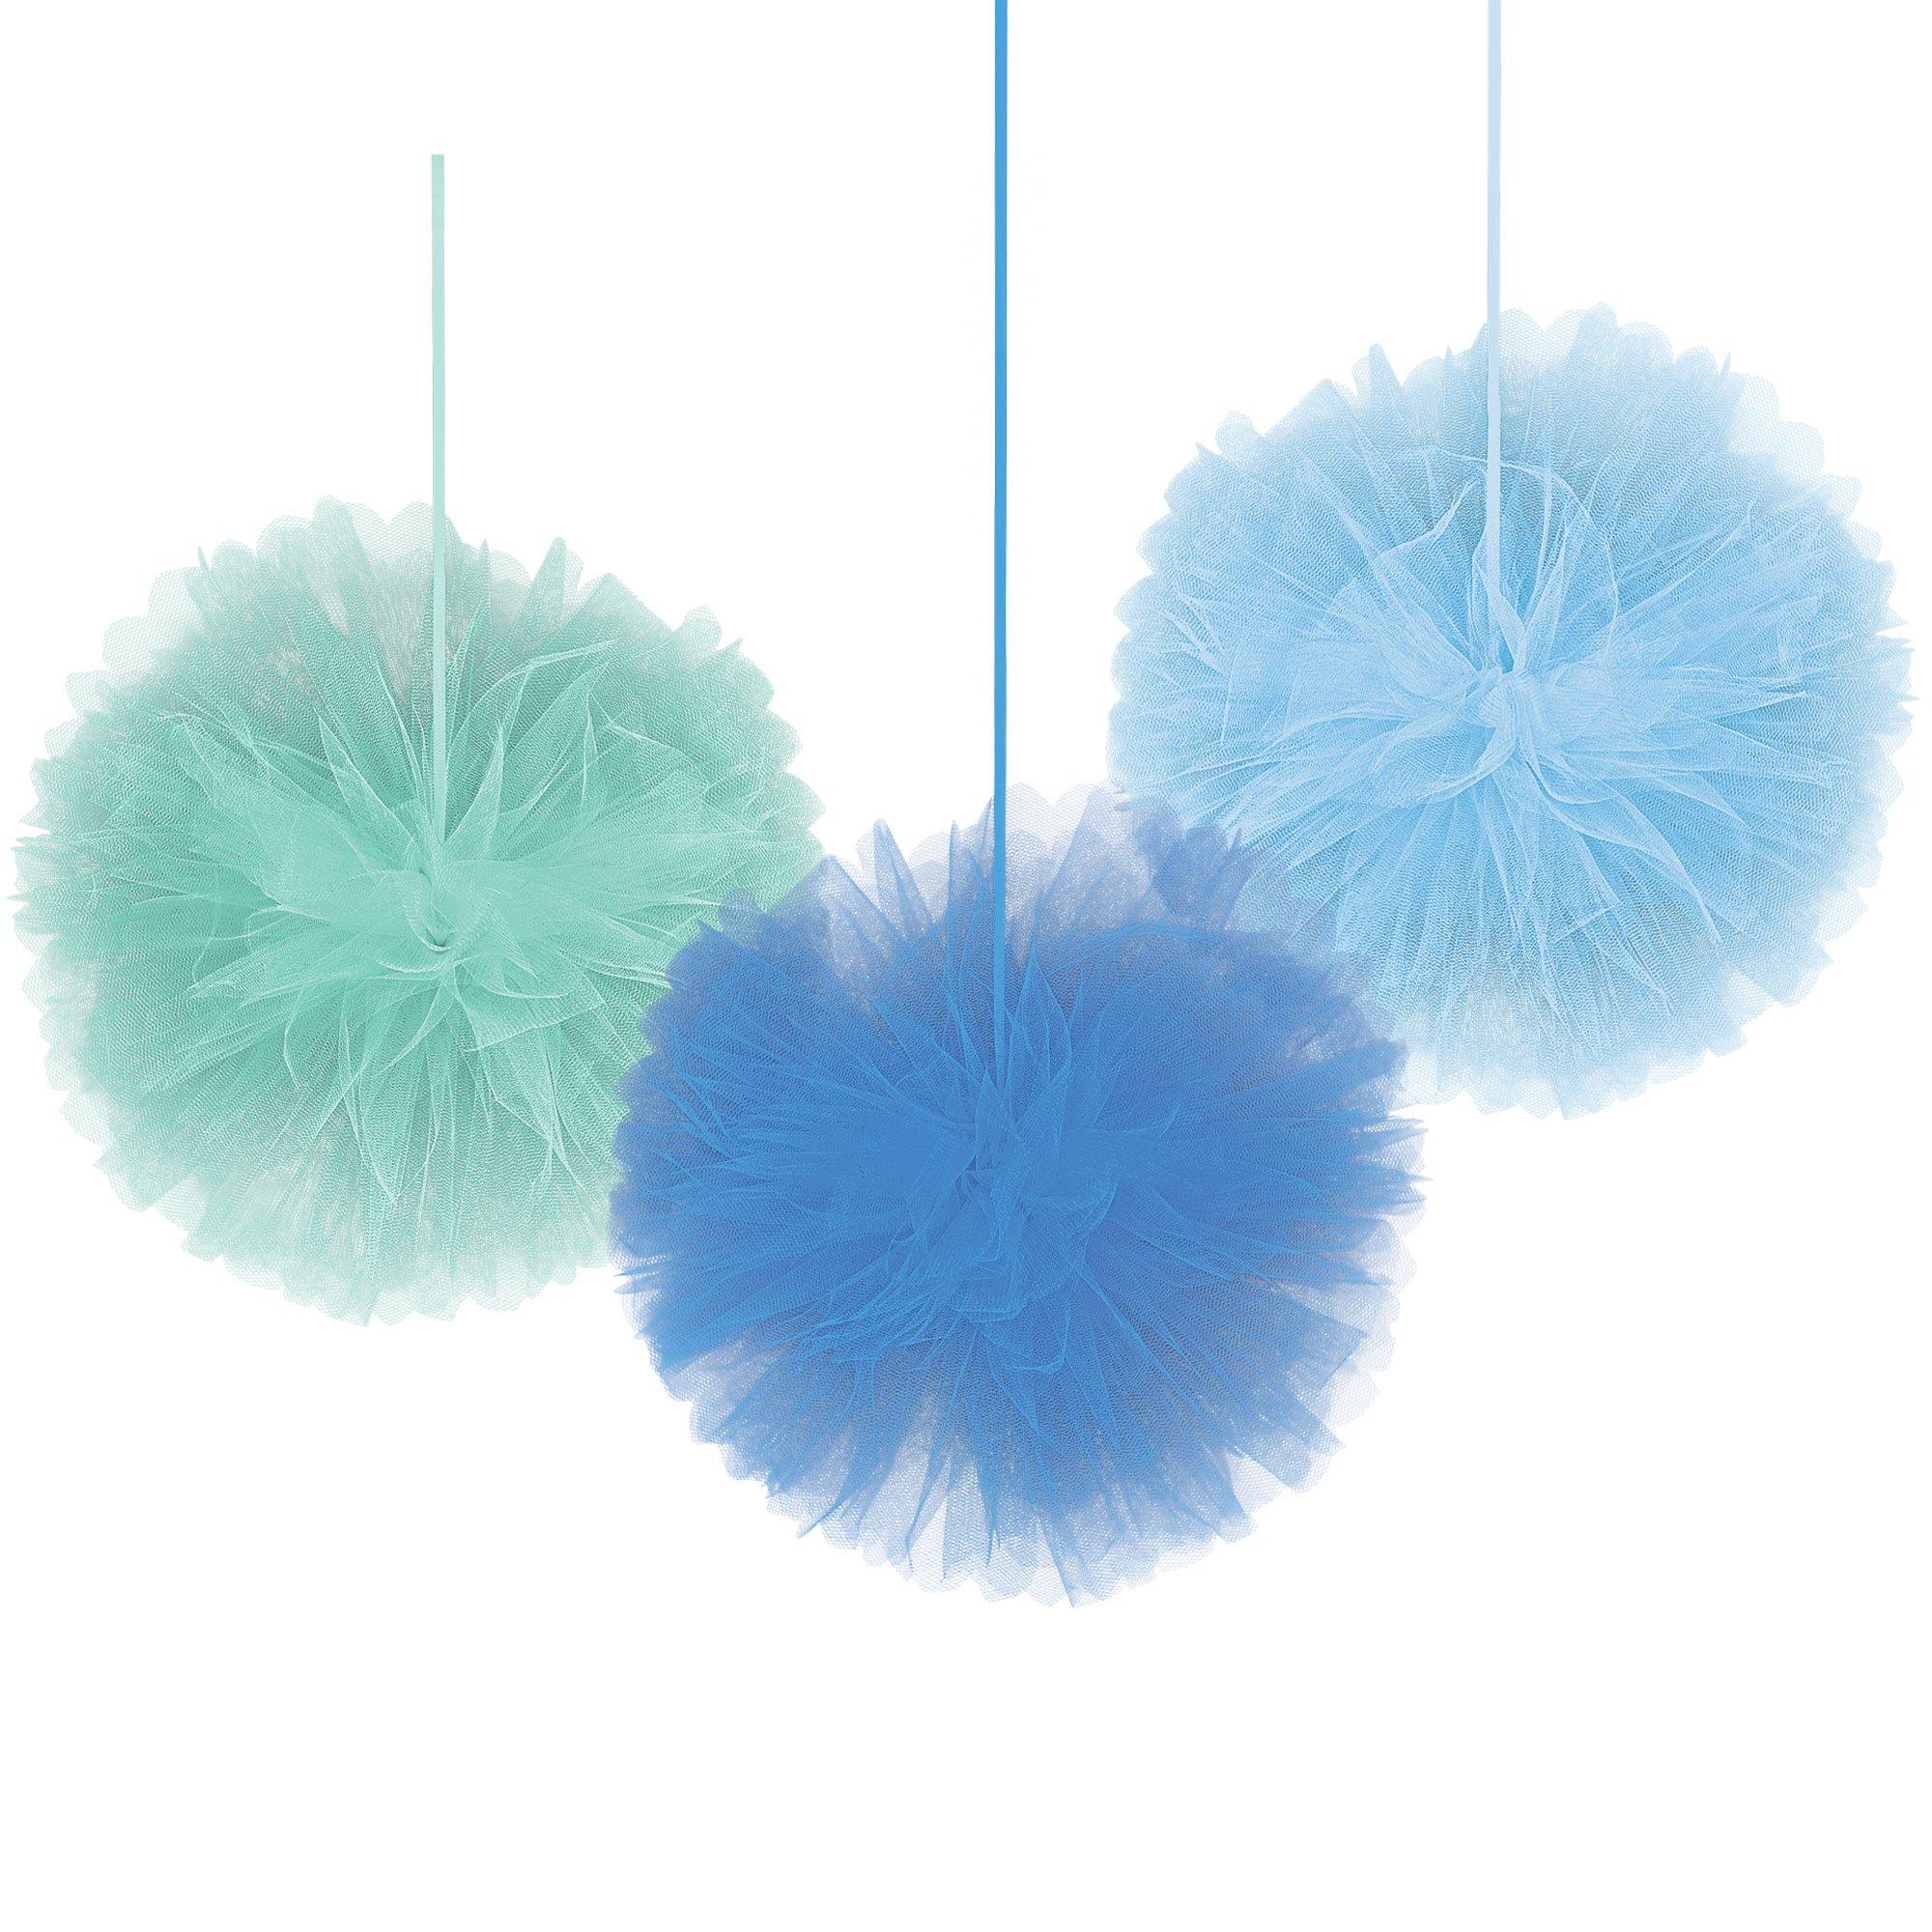 EZ-Fluff 20 Arctic Spa Blue Tissue Paper Pom Poms Flowers Balls, Hanging  Decorations (4 PACK) on Sale Now!, Chinese Lanterns